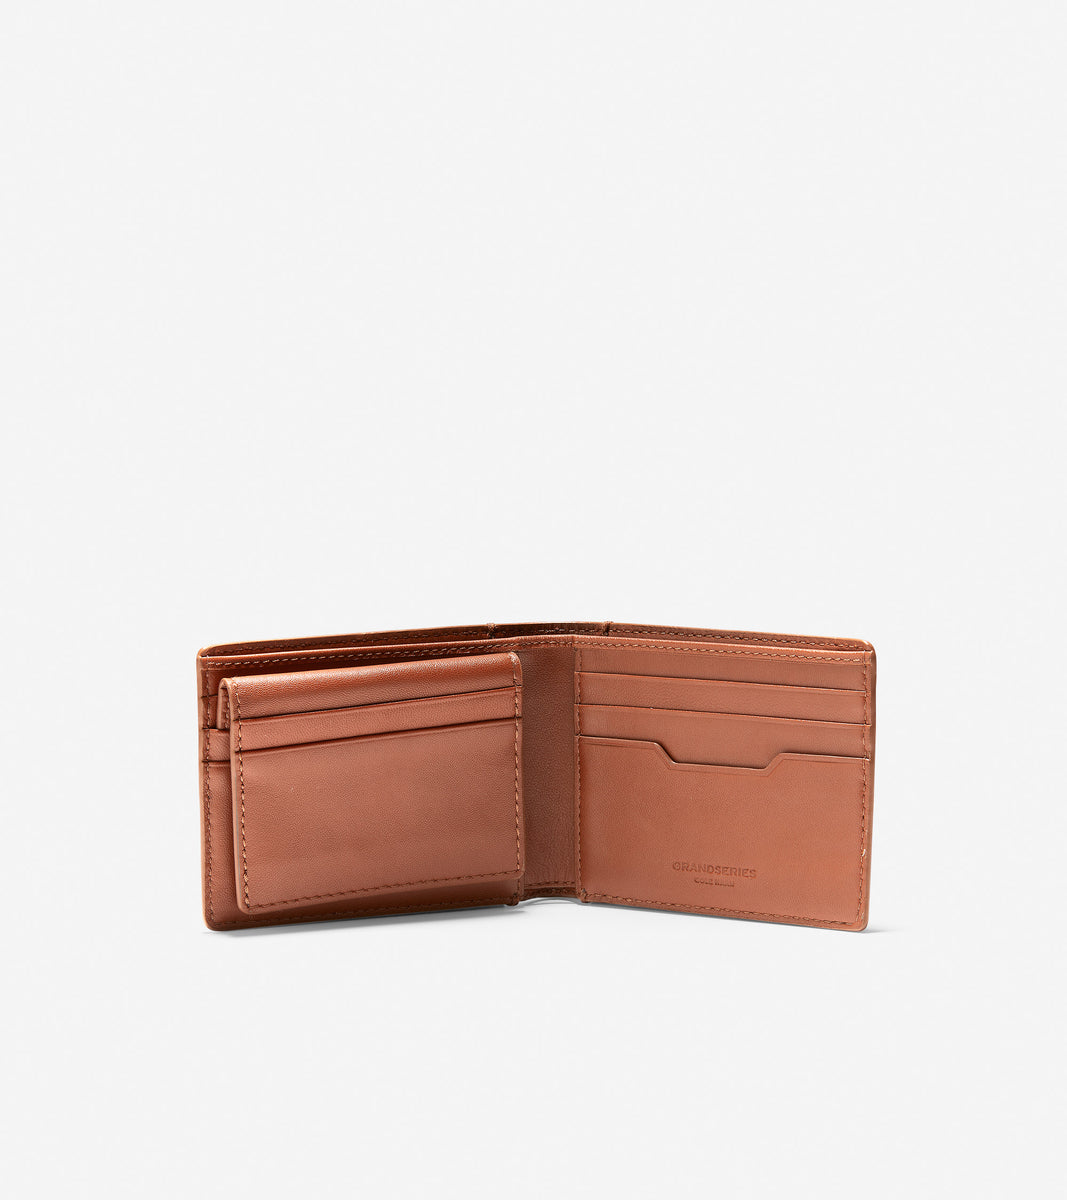 ColeHaan-GRANDSERIES Leather Bifold With Removable Pass Case-f11425-British Tan